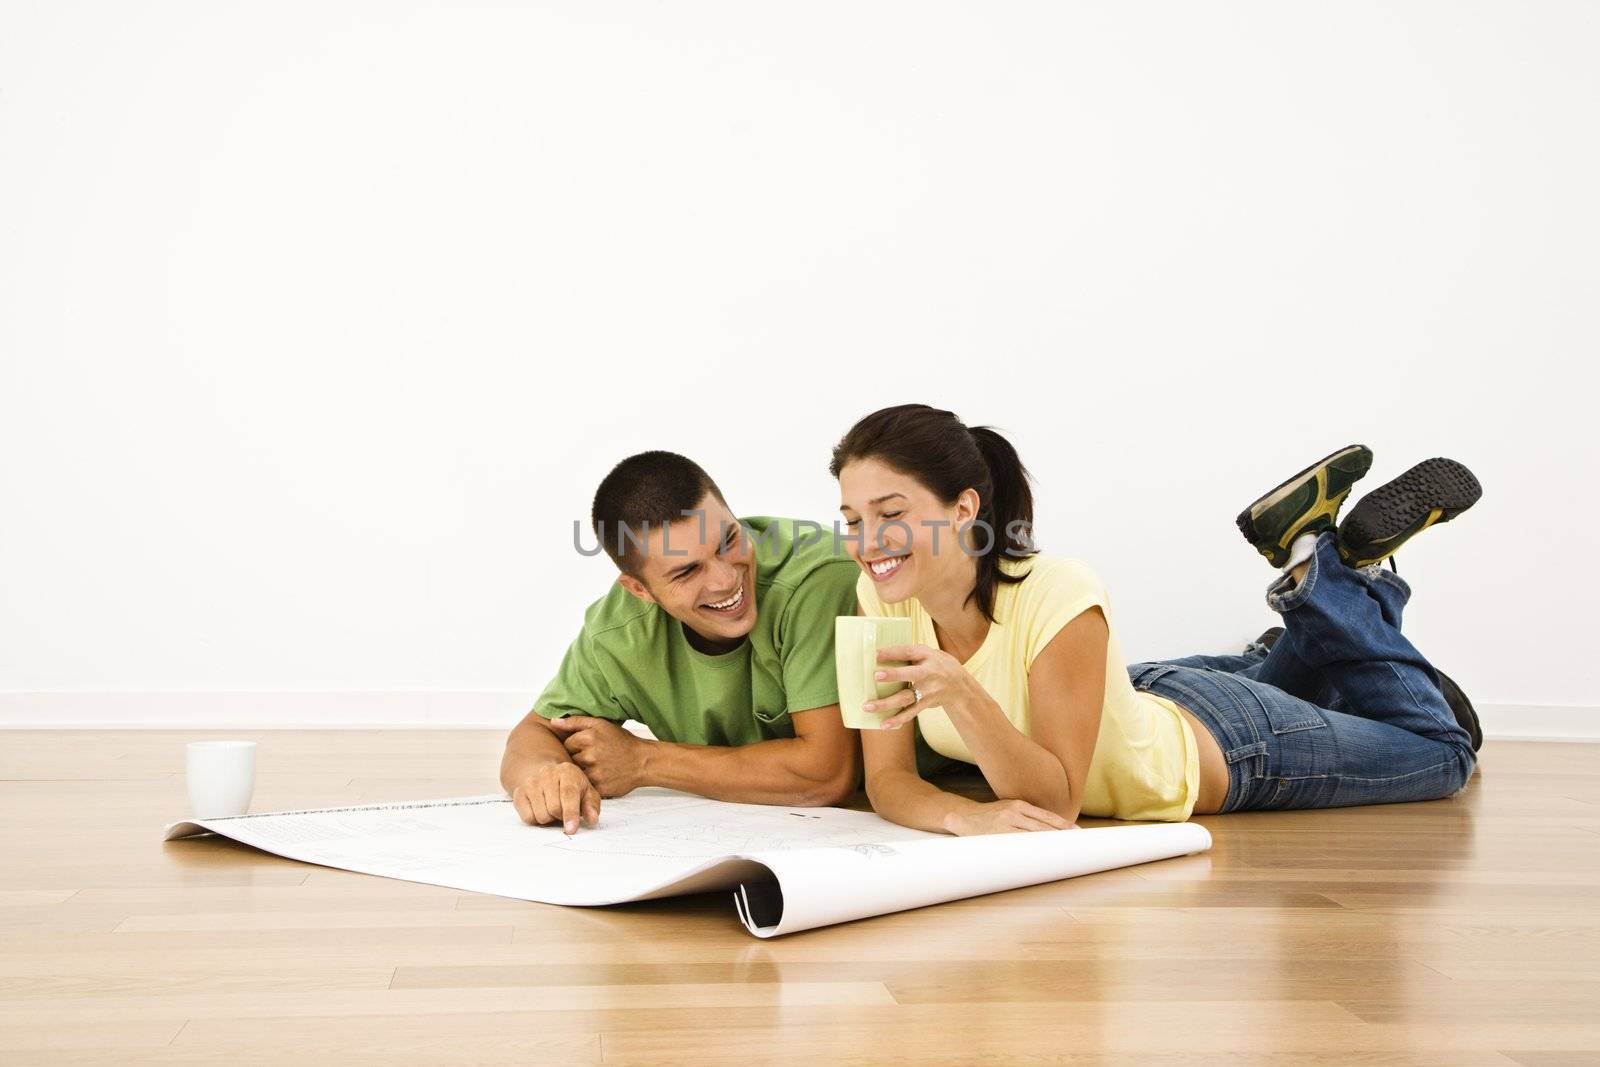 Attractive young adult couple lying on home floor with coffee cups smiling and looking at blueprints.